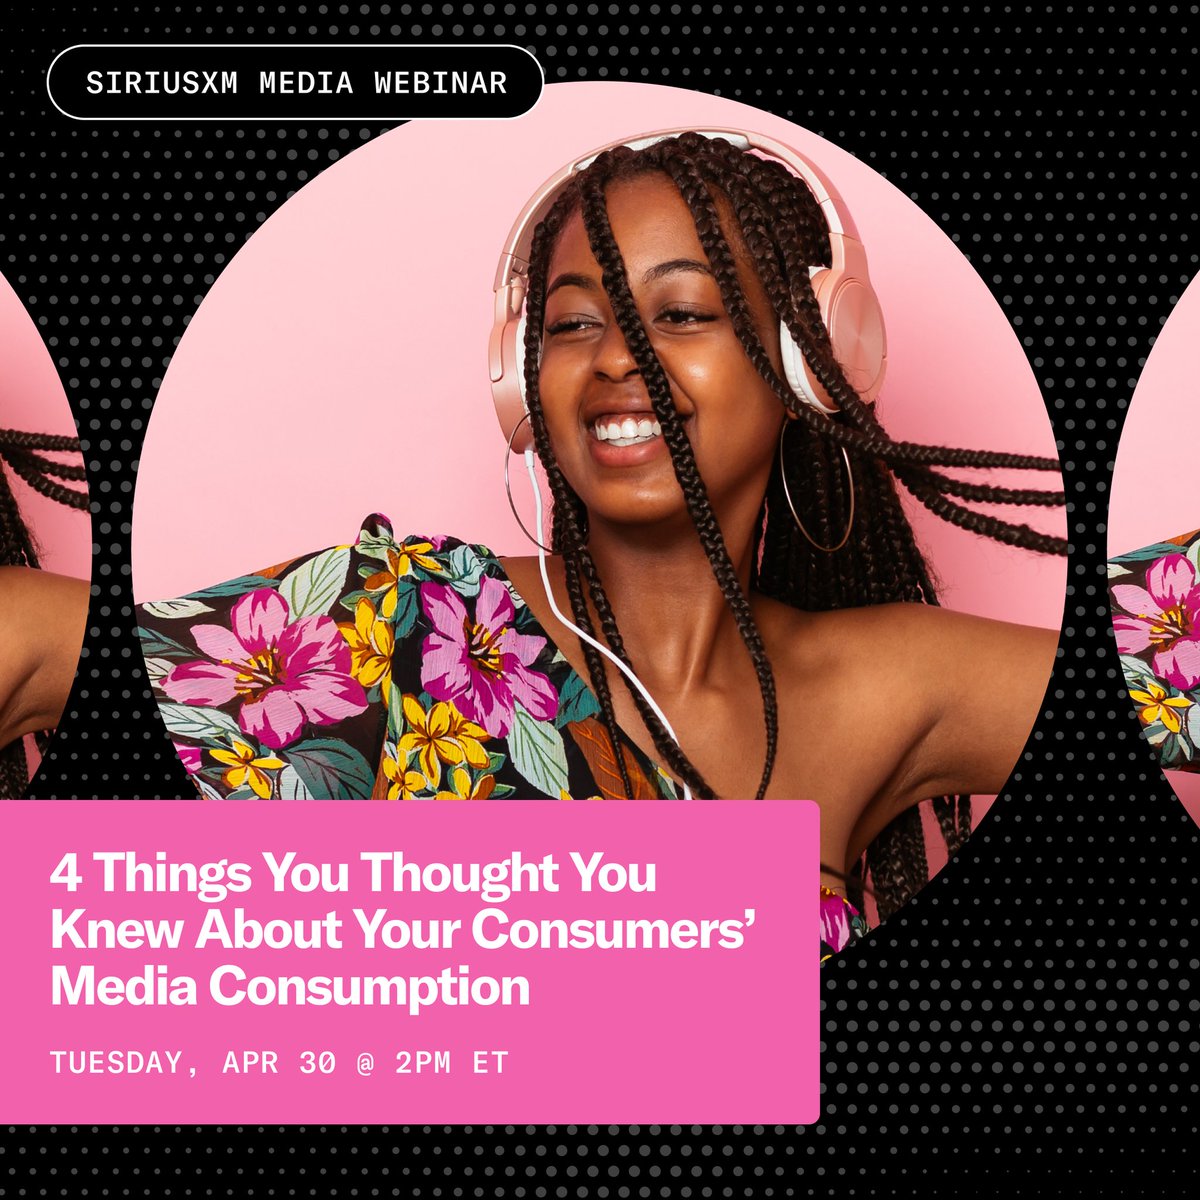 Do you know your consumers’ #mediaconsumption habits? Join our next #webinar to get the most recent and impactful data on how consumers show up on different media mediums—#socialmedia #ctv #tv #audio! 

RSVP here: bit.ly/3Q193k4

#consumertrends